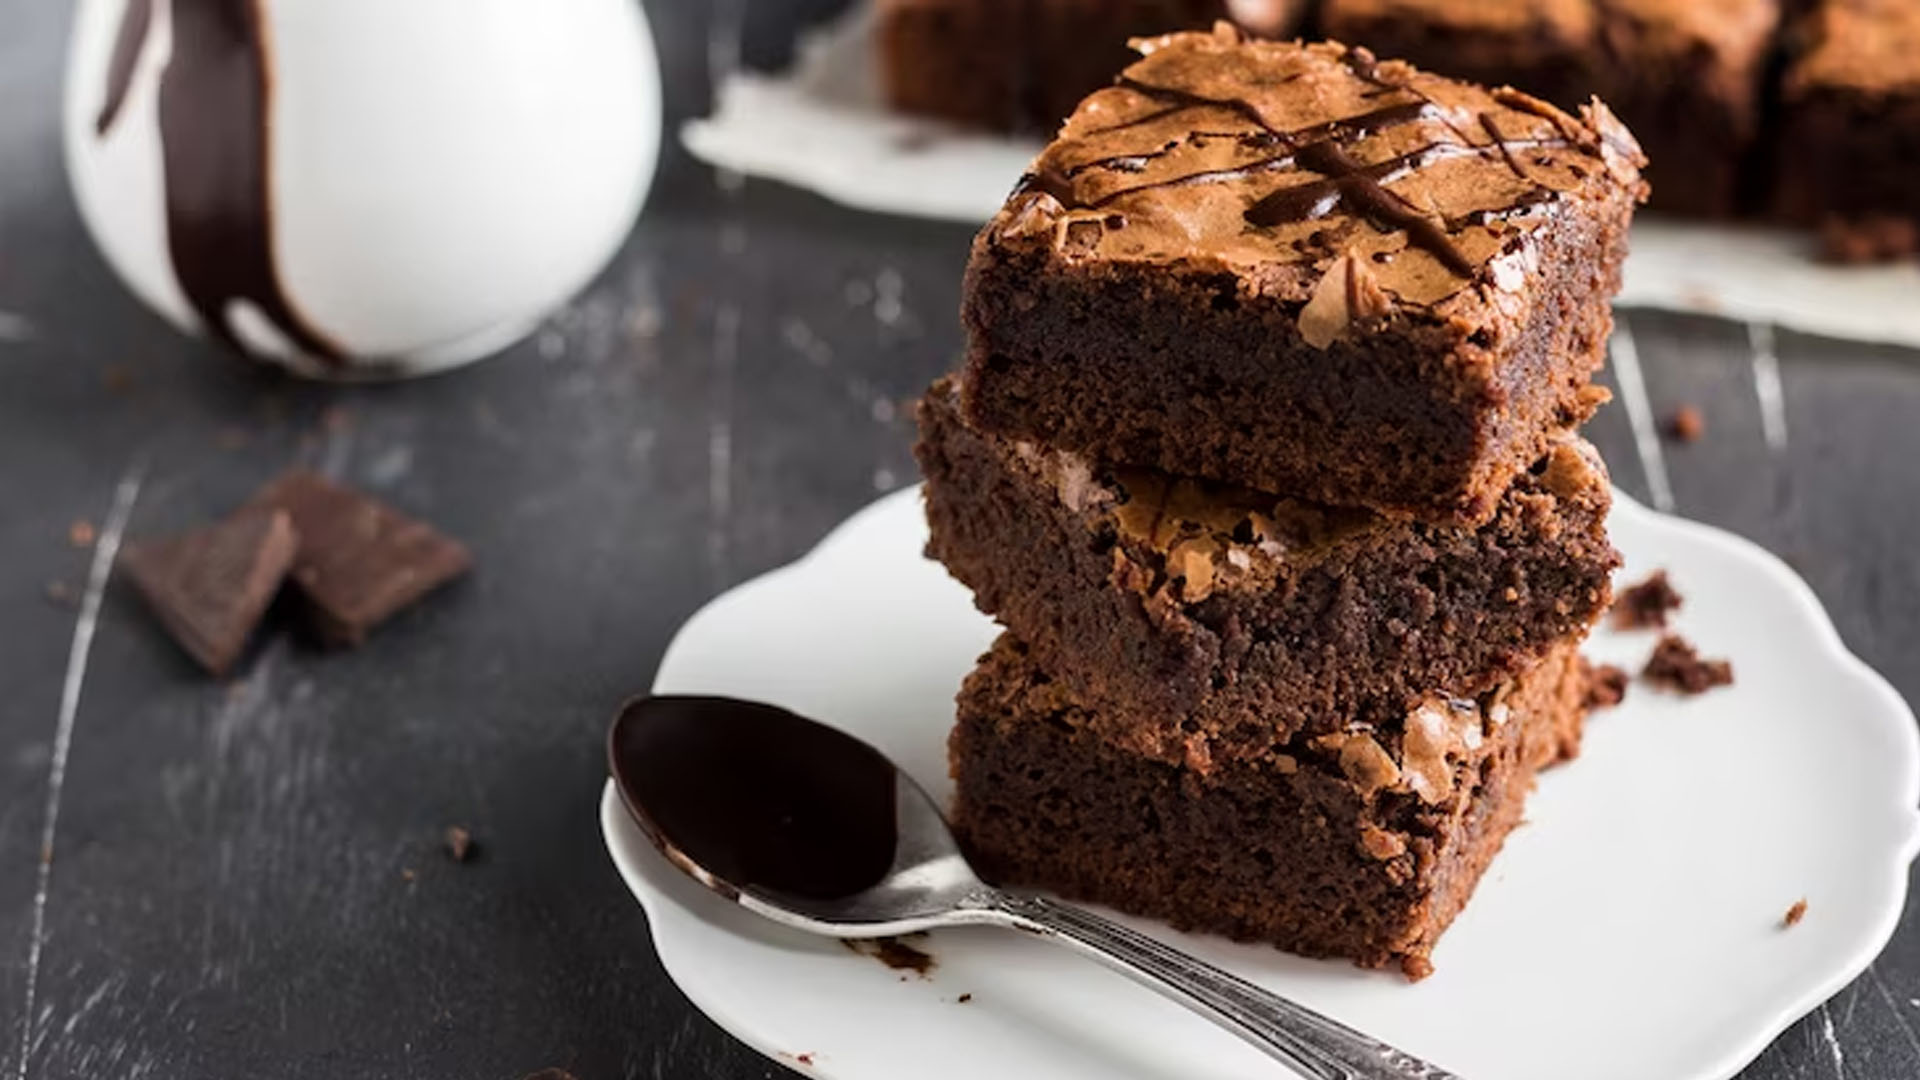 What Are The Health Benefits of Chocolate Brownies?